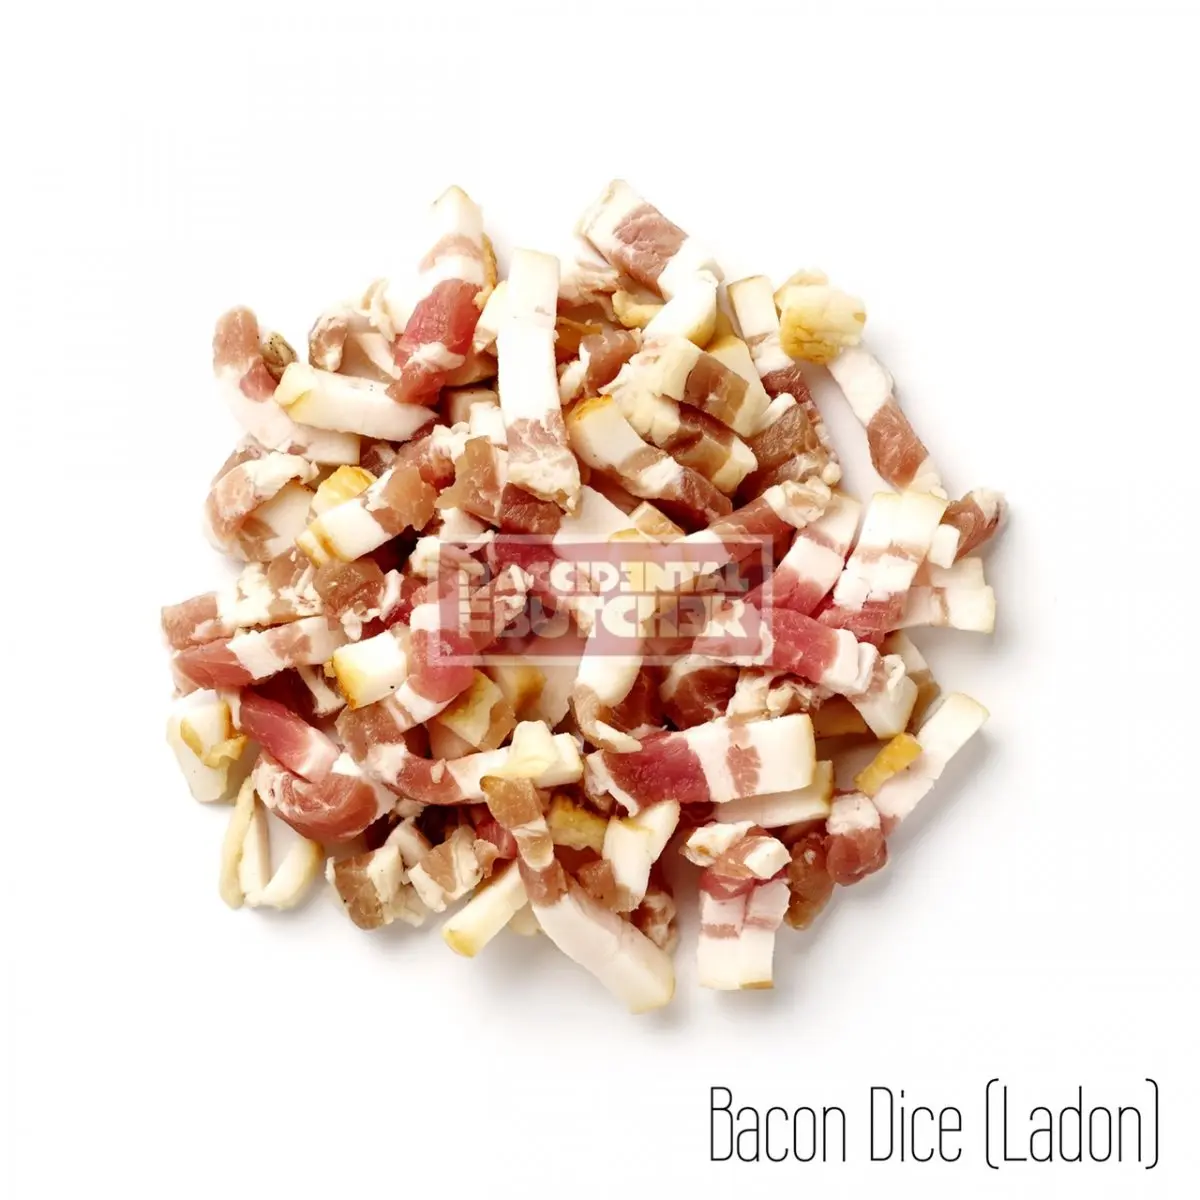 diced smoked bacon - Is diced bacon ready to eat